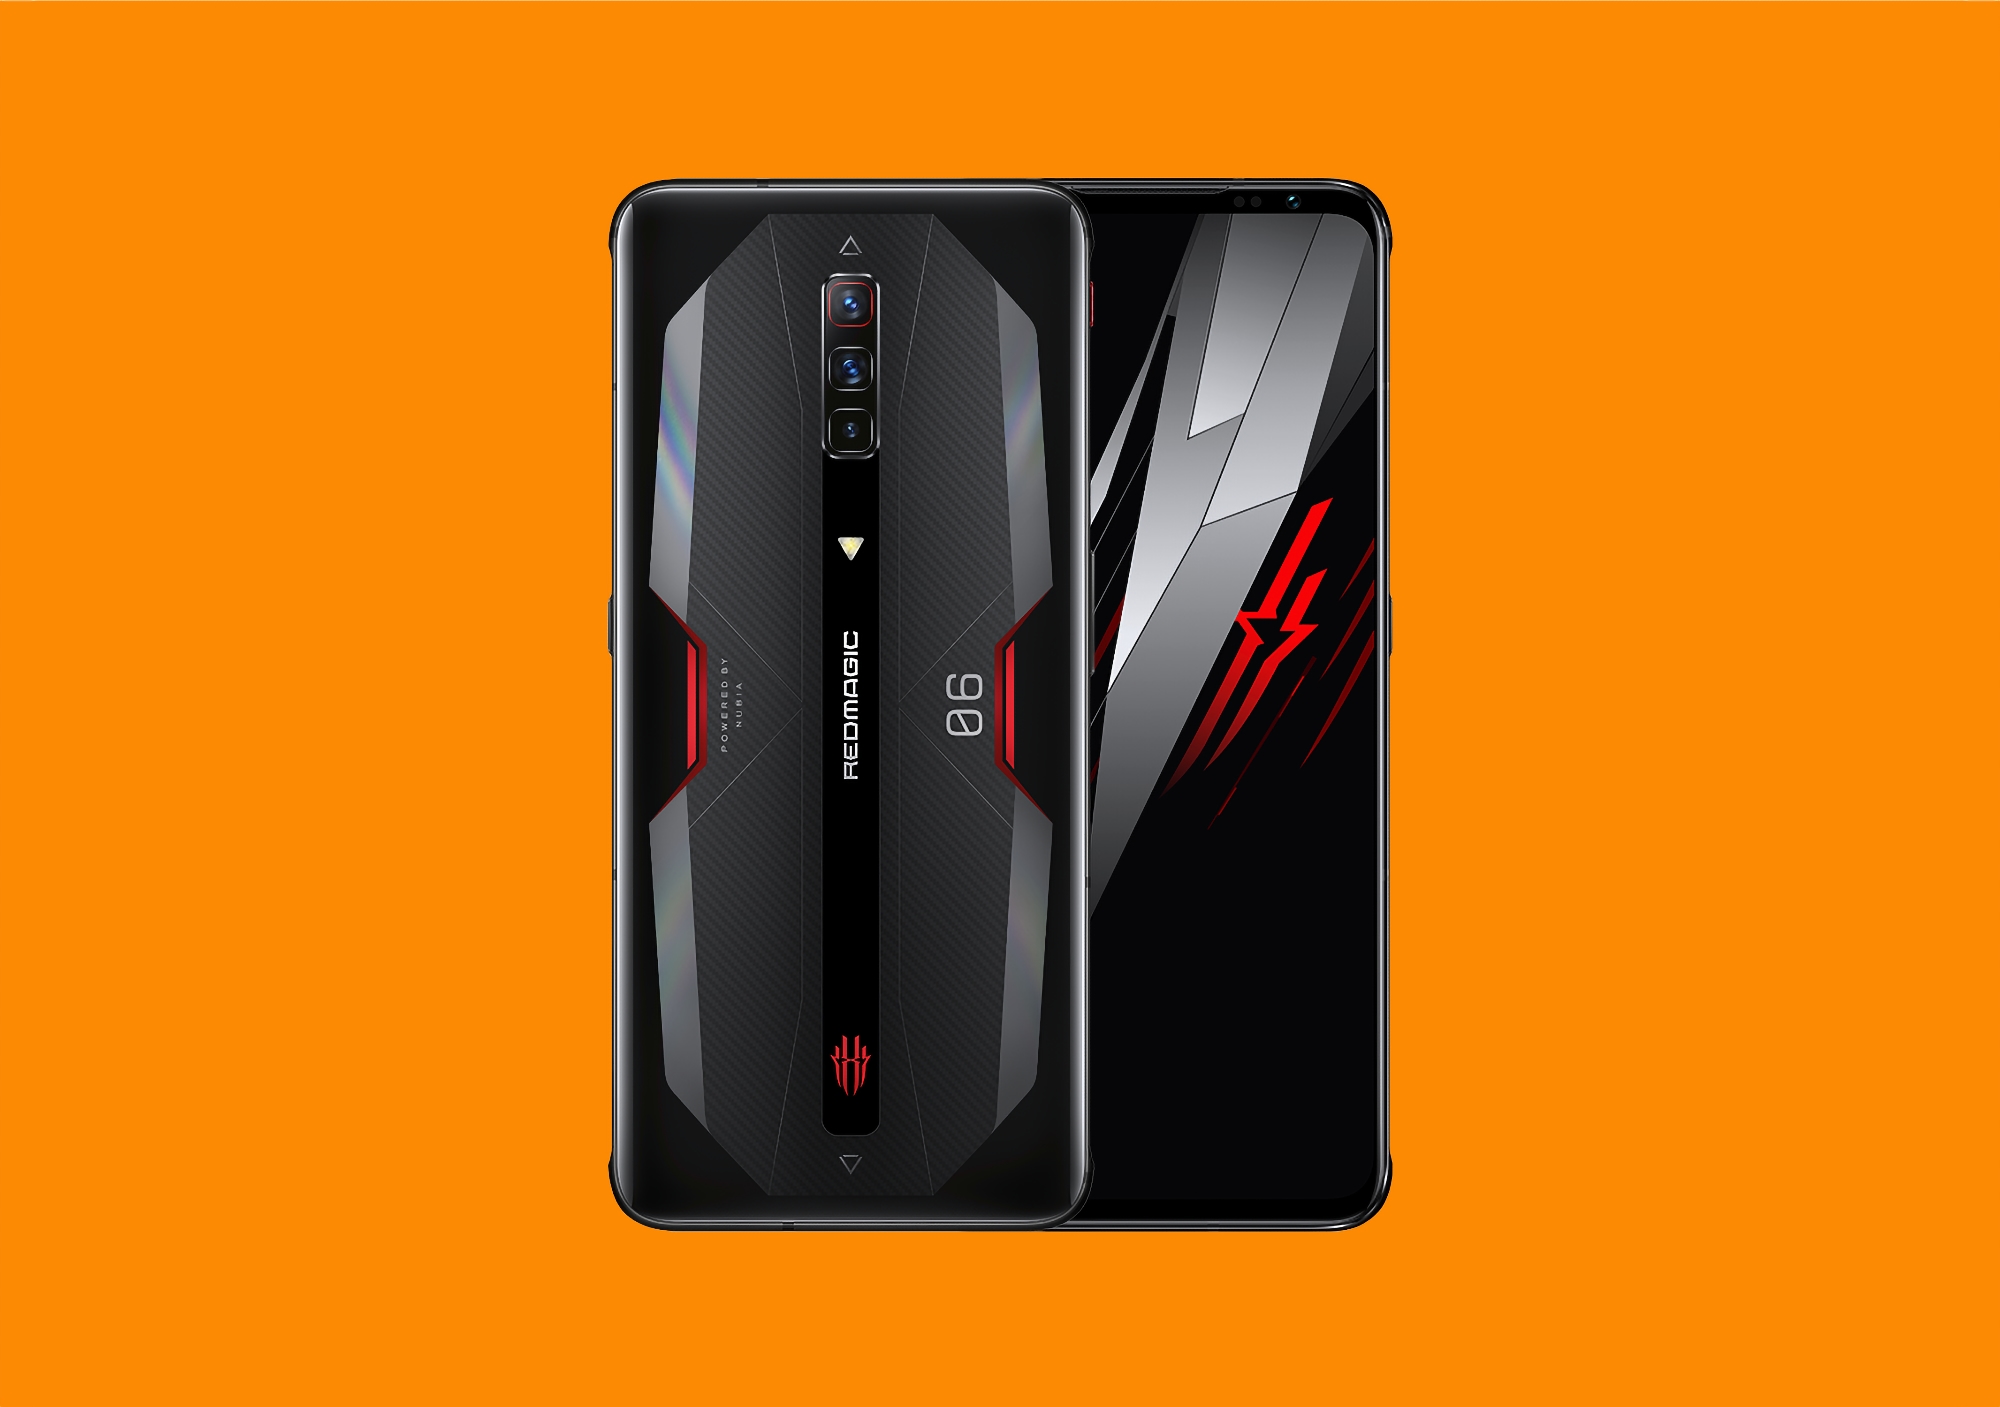 Official: Nubia Red Magic 7 gaming smartphone with Snapdragon 8 Gen 1 chip and 165W charging will be presented in February